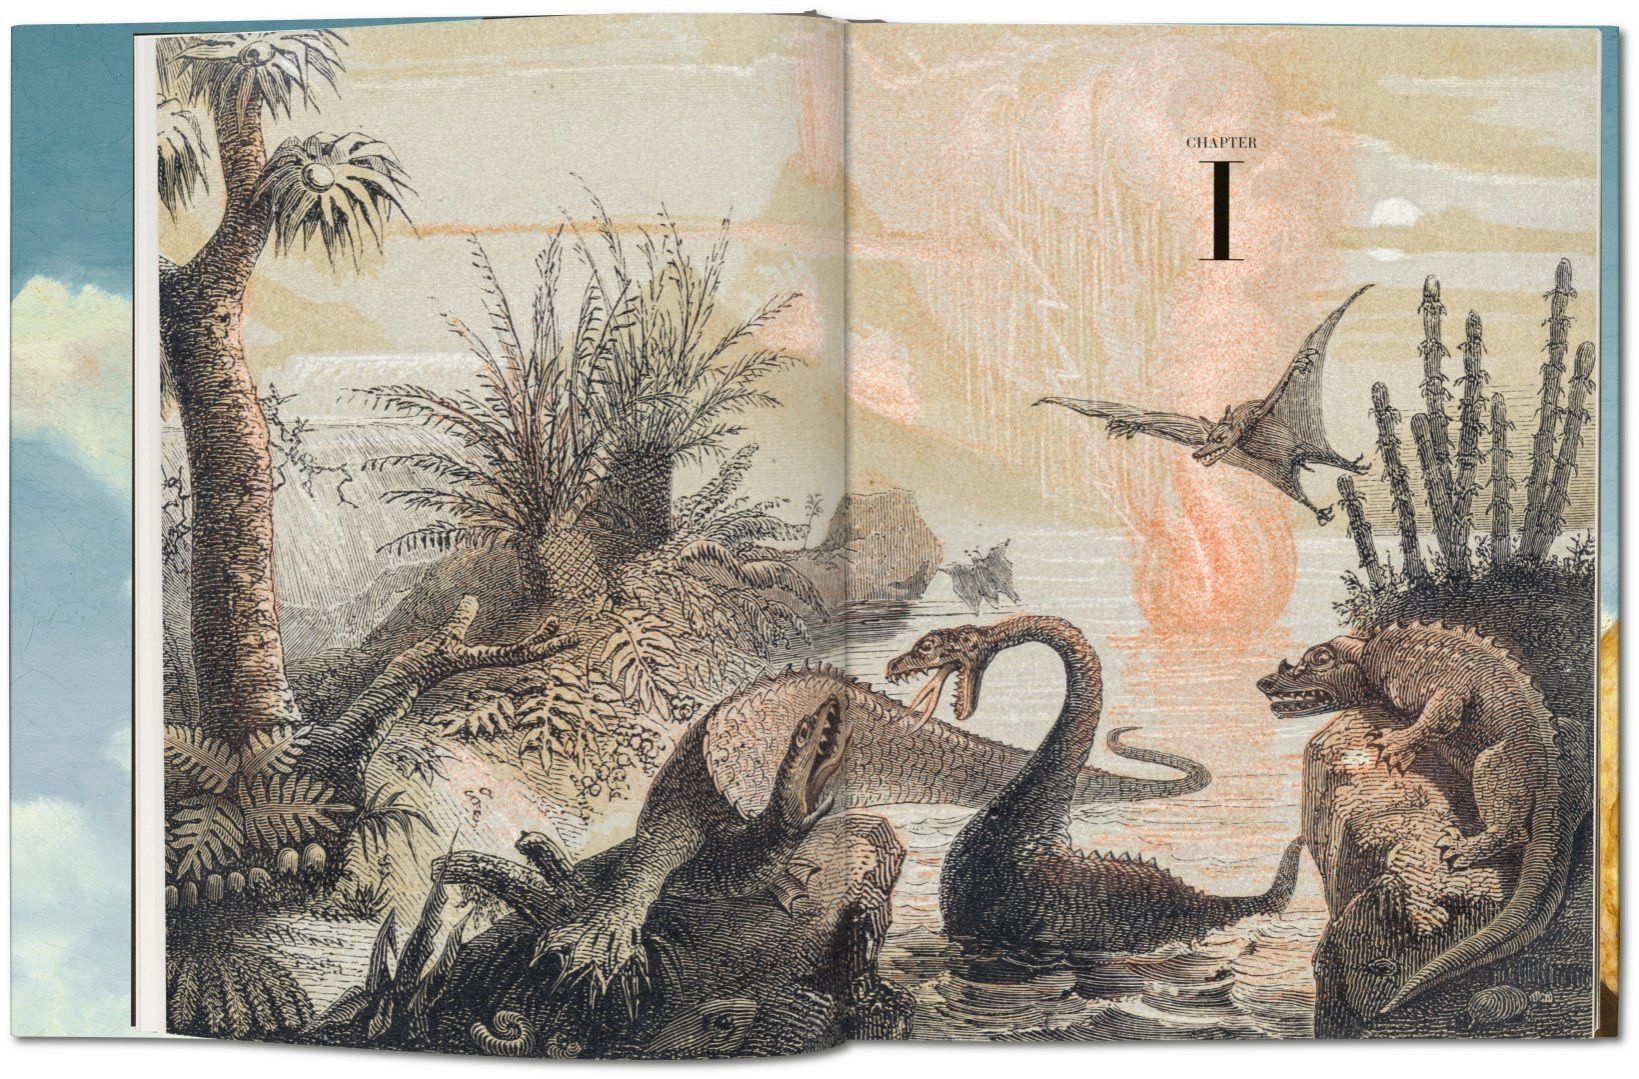 Paleoart: Visions of the Historic Past - Sample Art